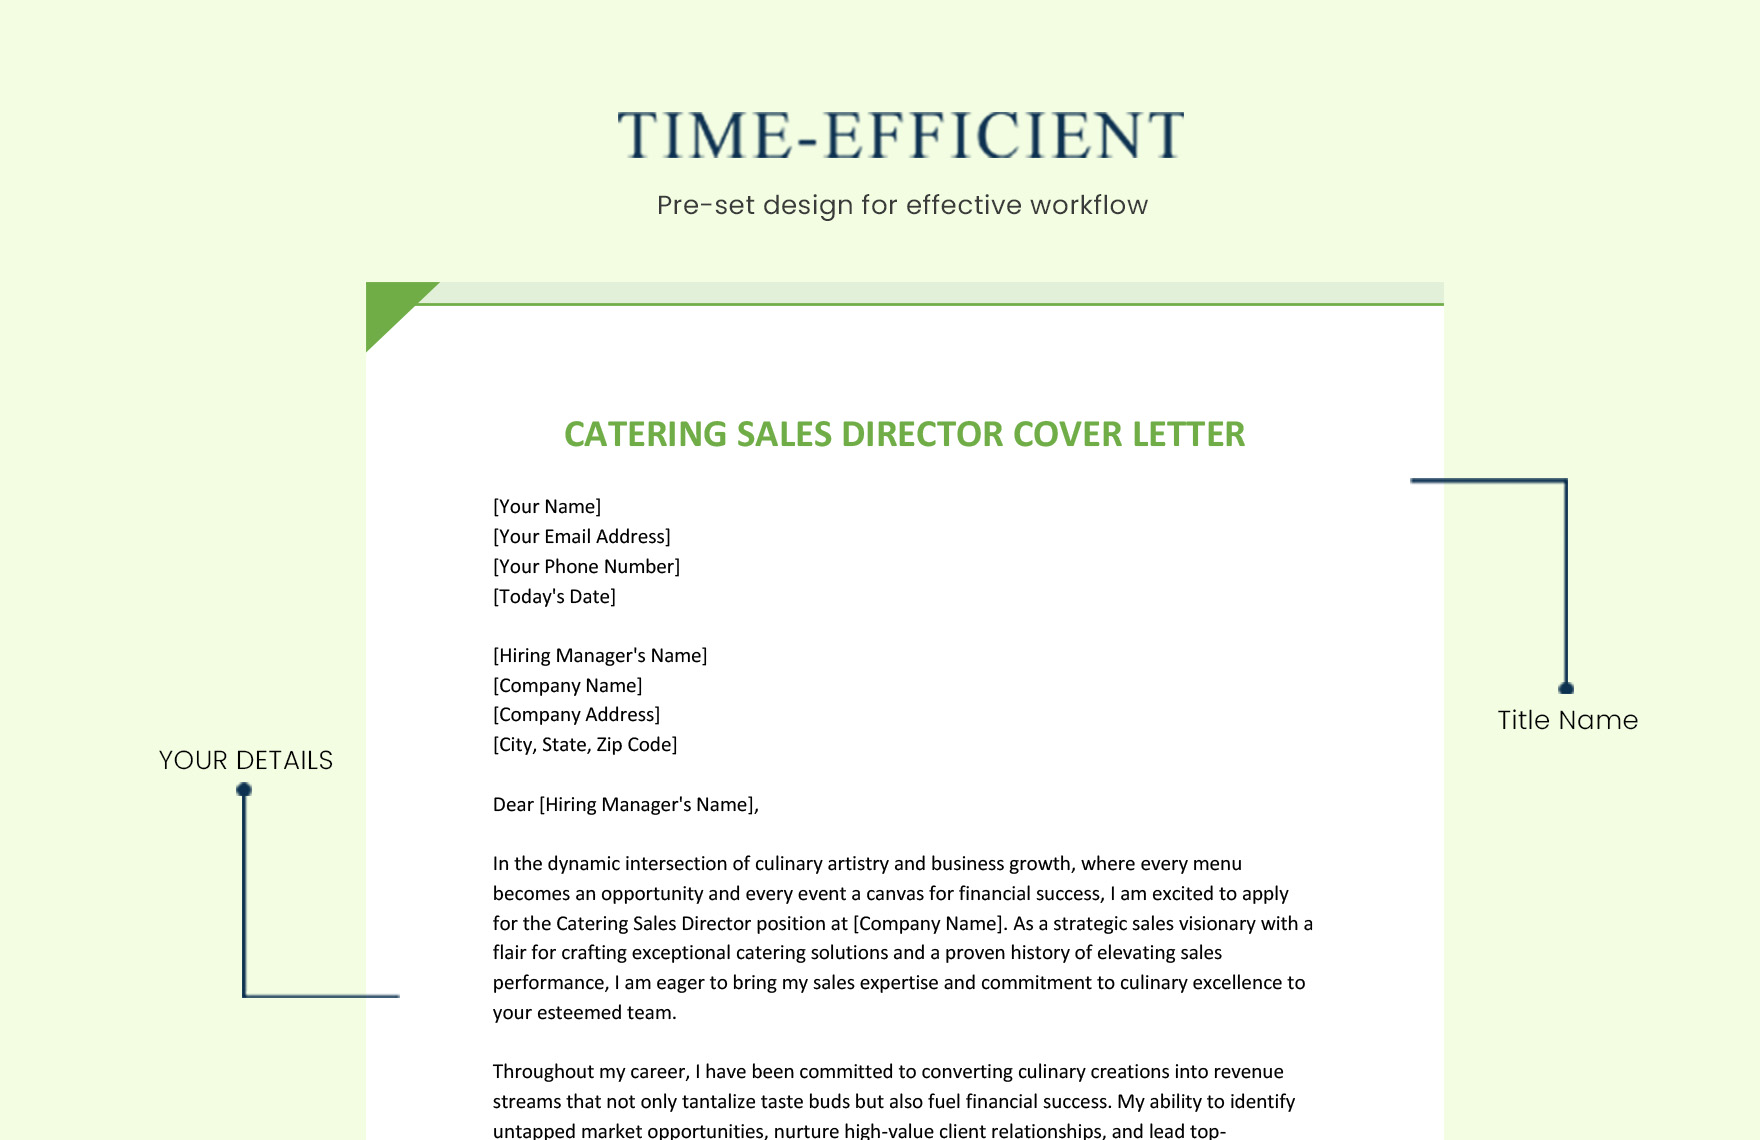 Catering Sales Director Cover Letter